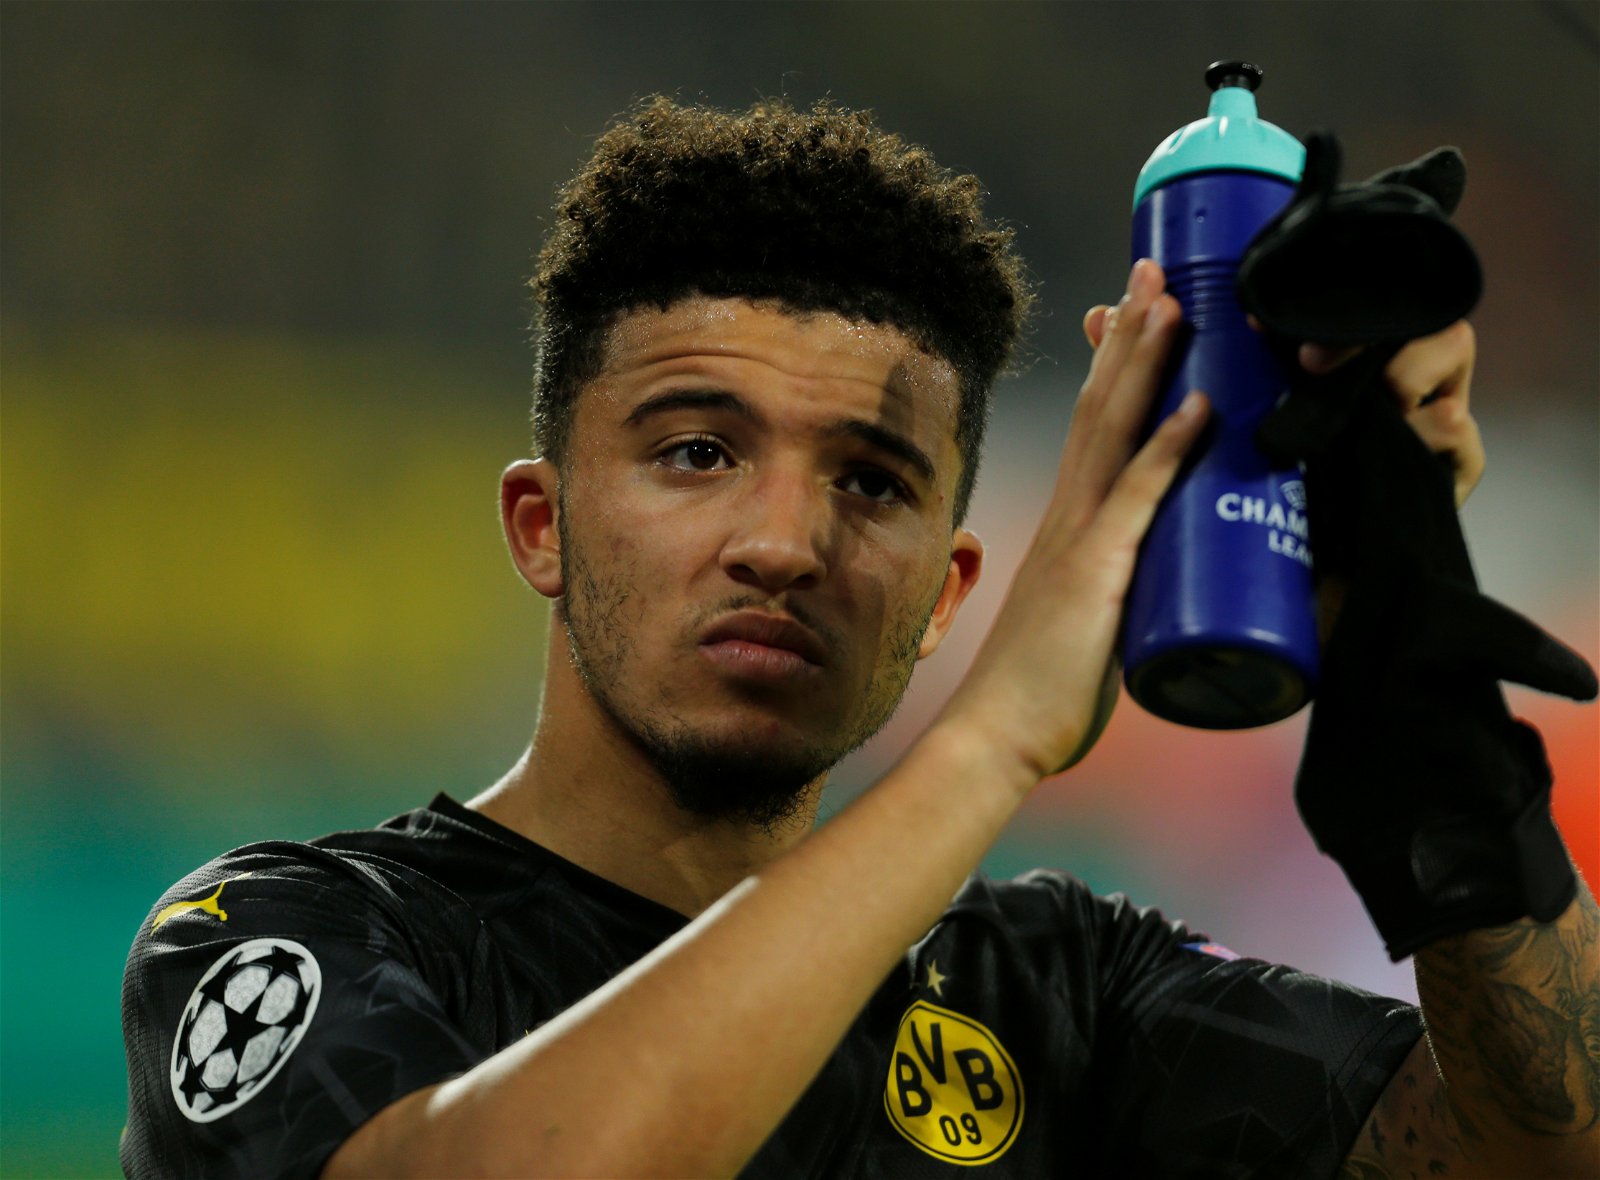 Sancho teases Chelsea fans with transfer rumors